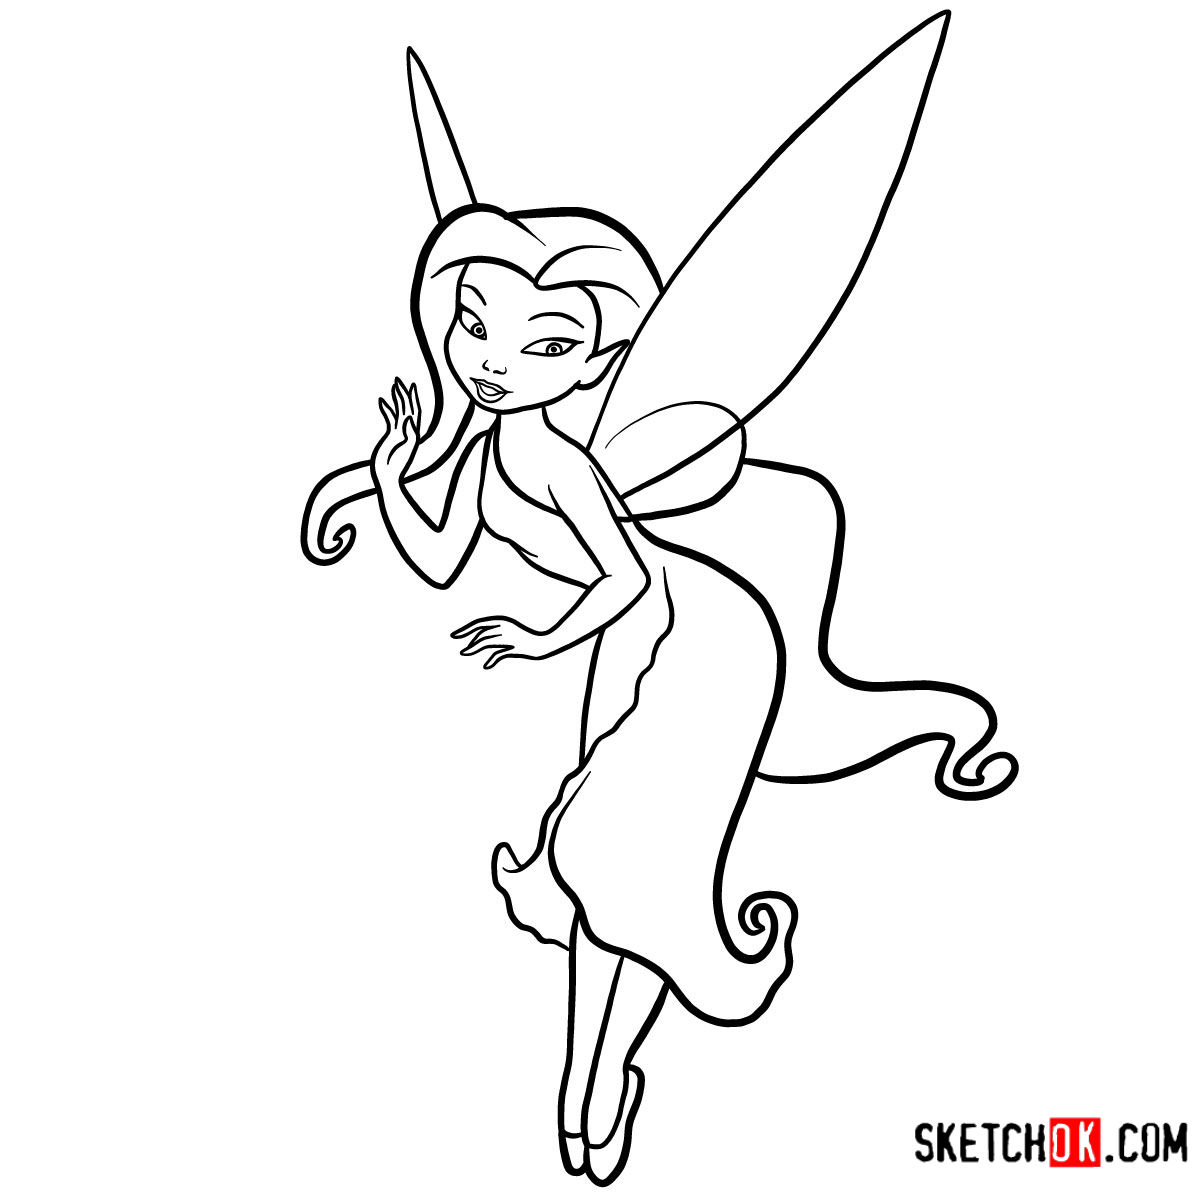 How to draw Silvermist the water-talent fairy